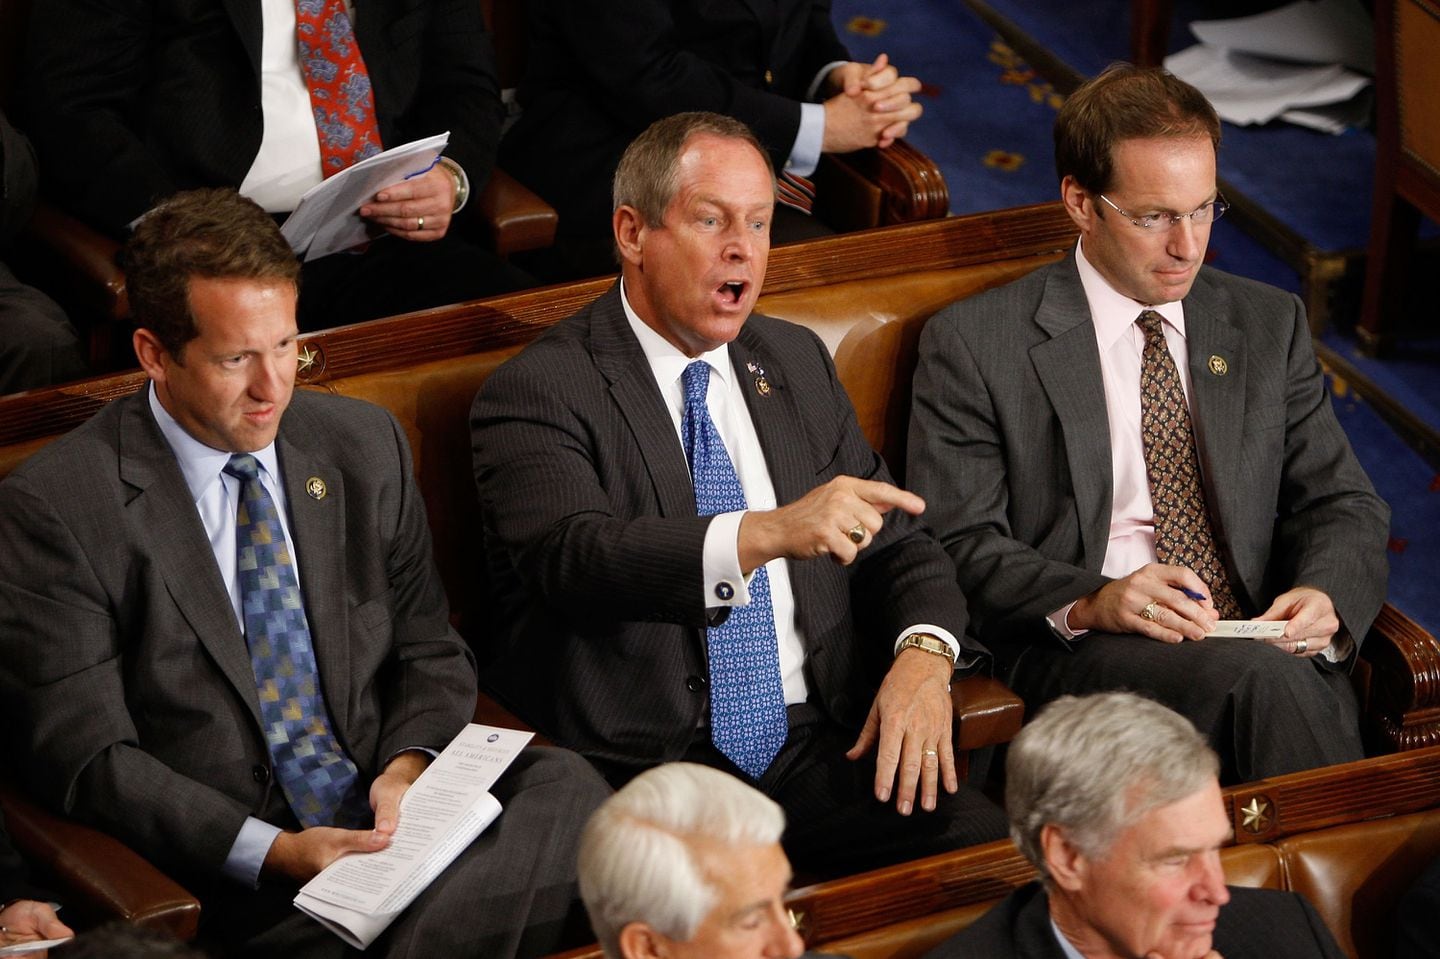 Representative Joe Wilson of South Carolina shouted "You lie!" at President Barack Obama during a joint session of the US Congress on Sept. 9, 2009.